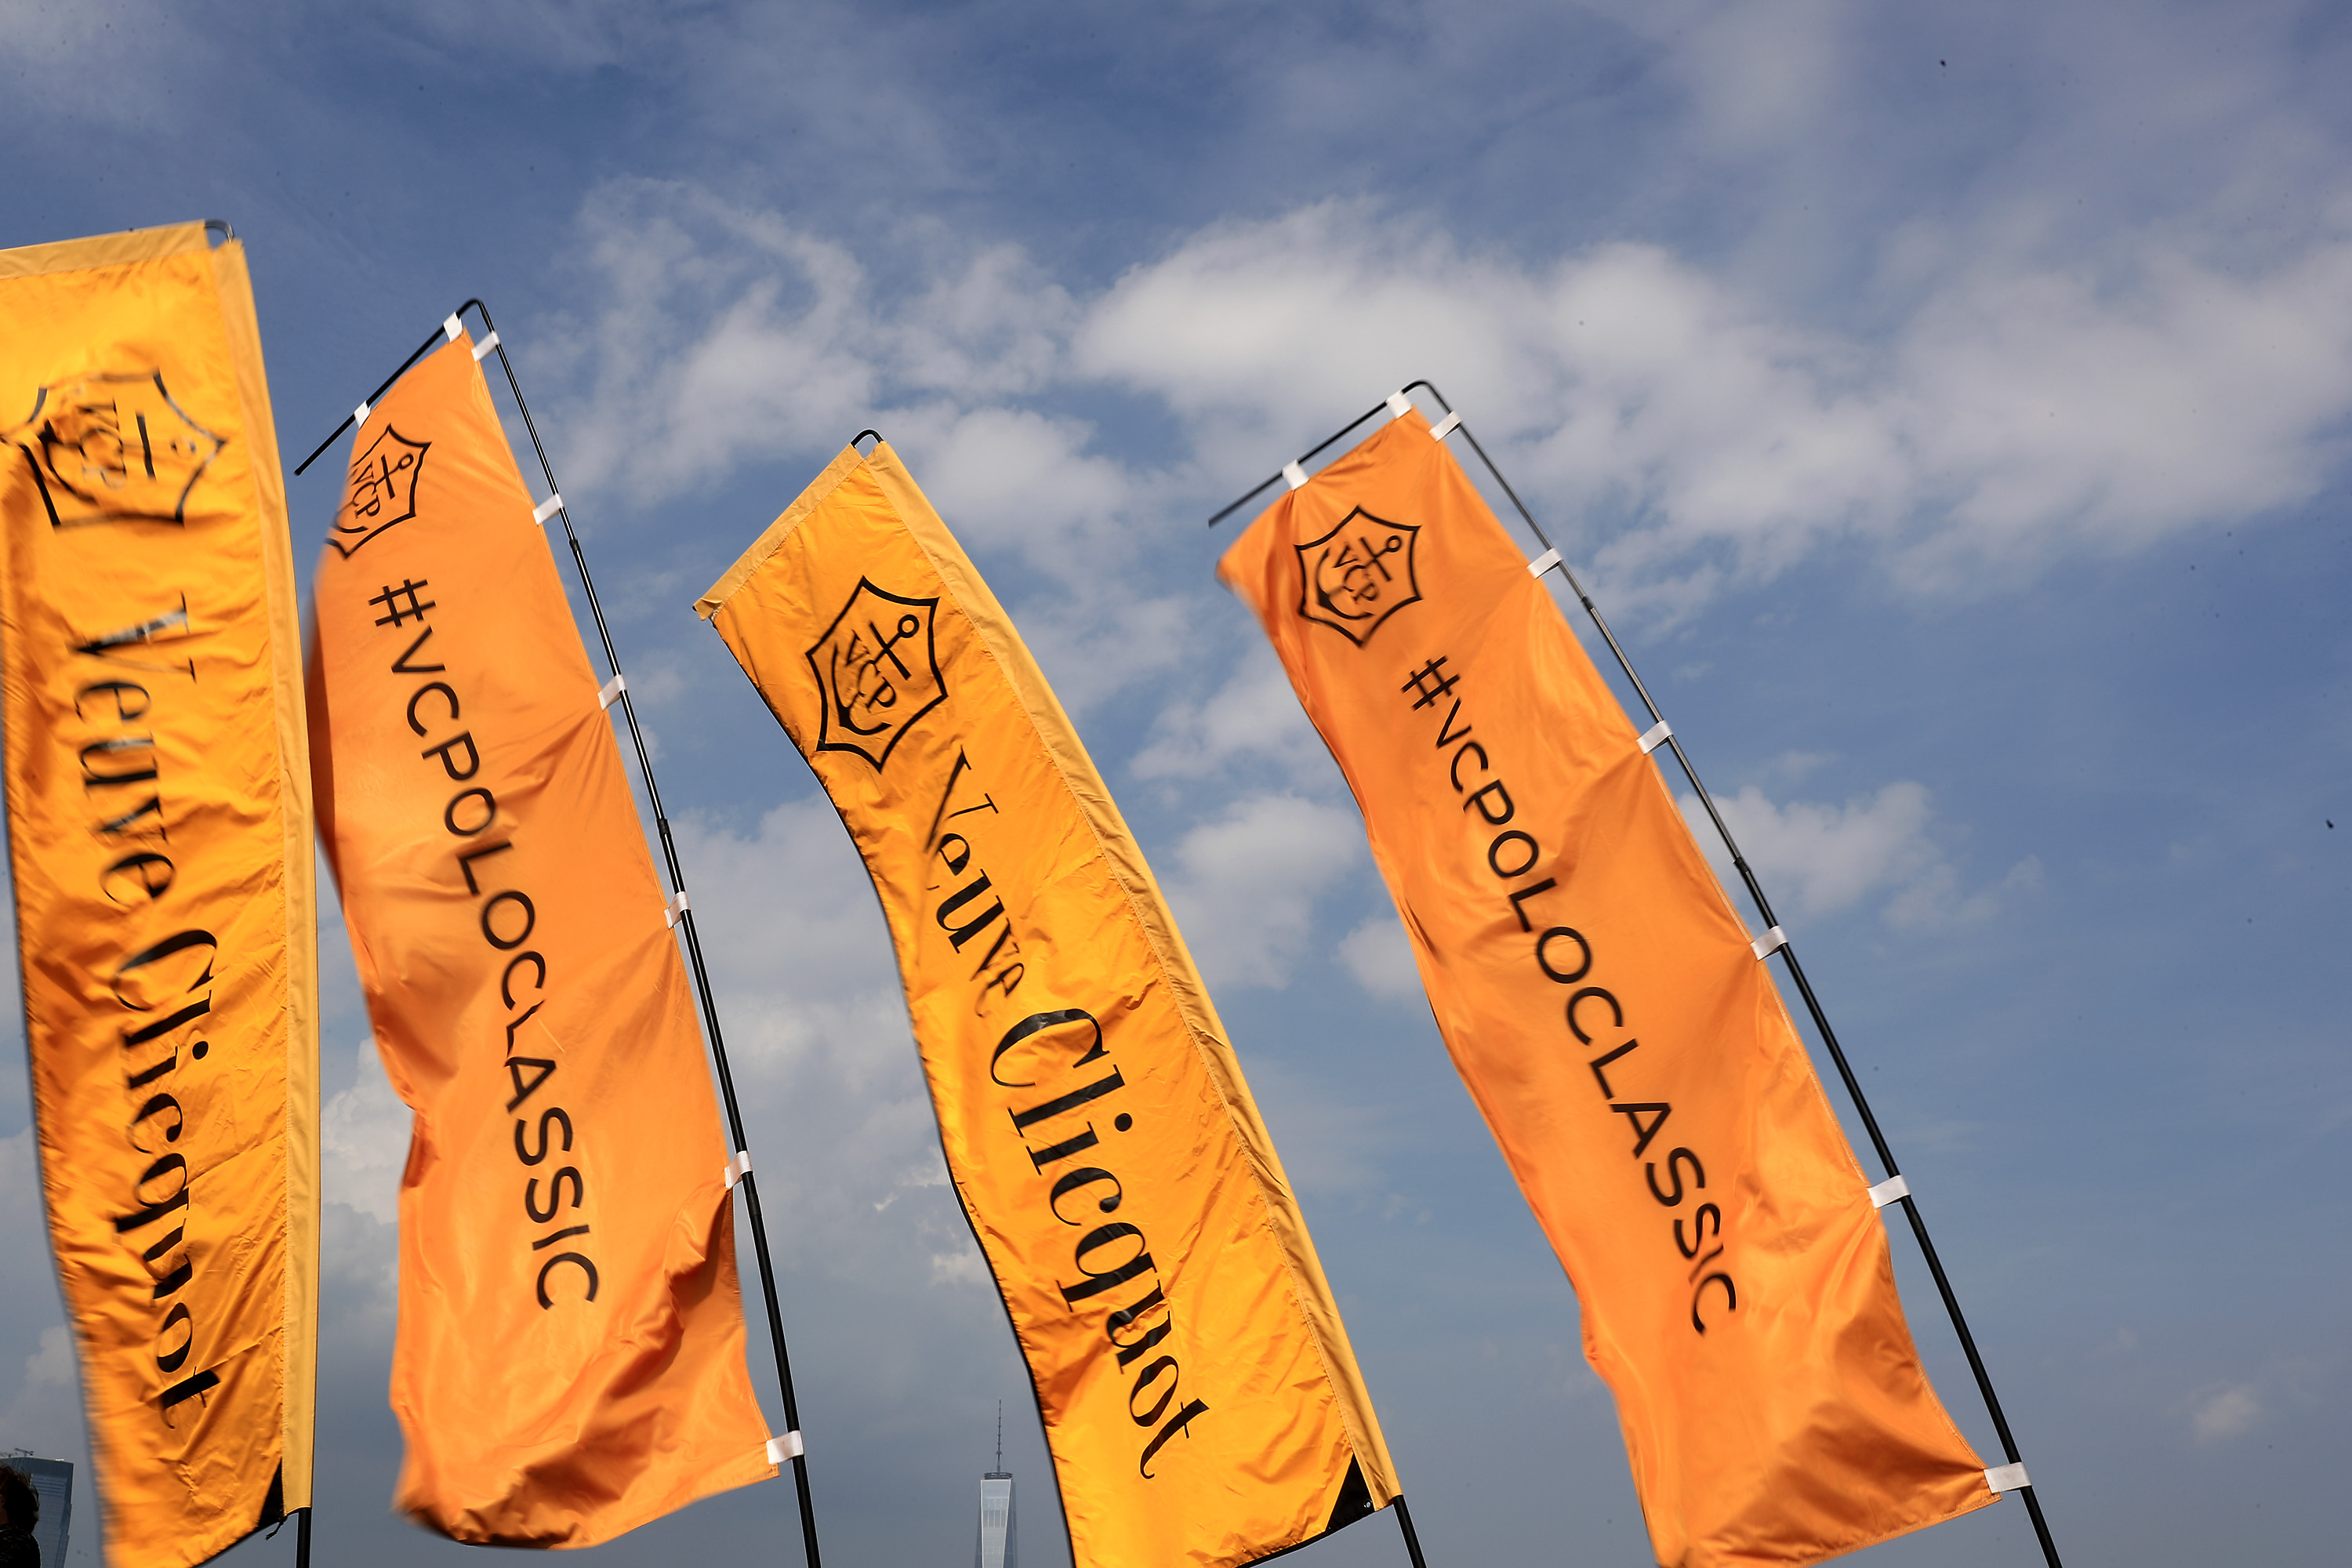 JERSEY CITY, NJ - JUNE 04:  Veuve Clicquot  signage on display at the Ninth Annual Veuve Clicquot Polo Classic at Liberty State Park on June 4, 2016 in Jersey City, New Jersey.  (Photo by Neilson Barnard/Getty Images for Veuve Clicquot)